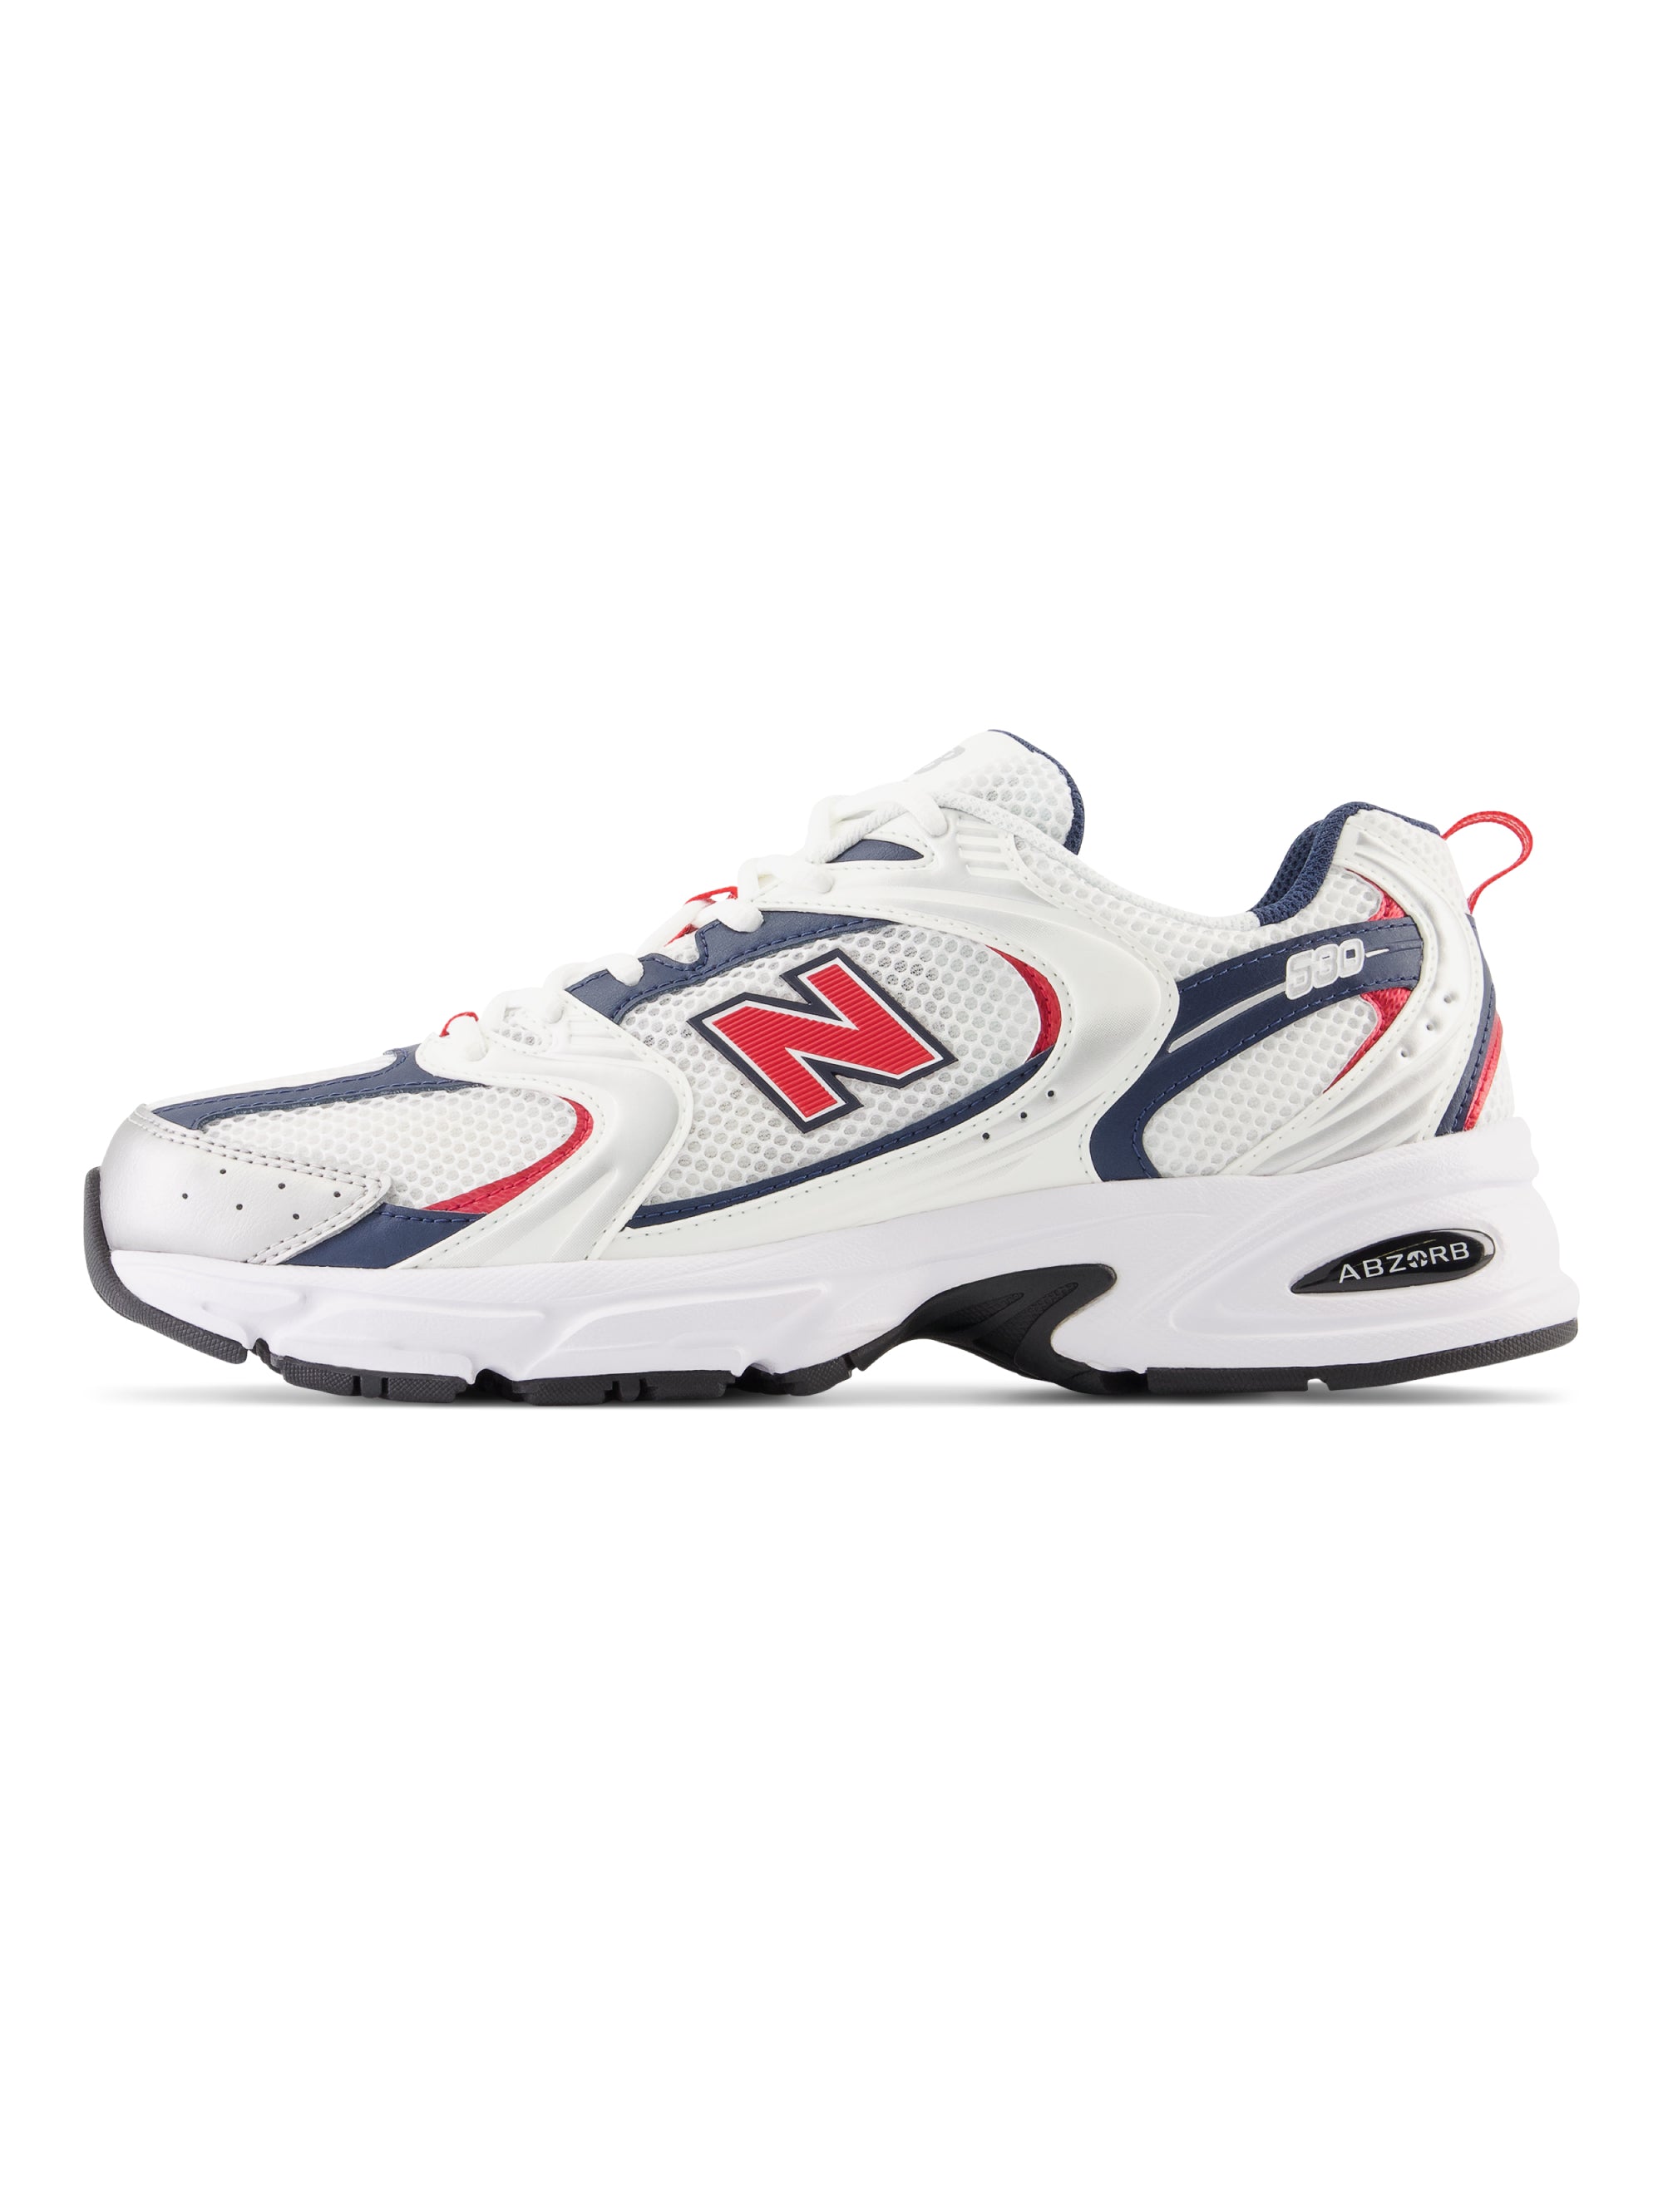 NEW BALANCE-Sneakers 530 Lifestyle Bianco/Rosso-TRYME Shop